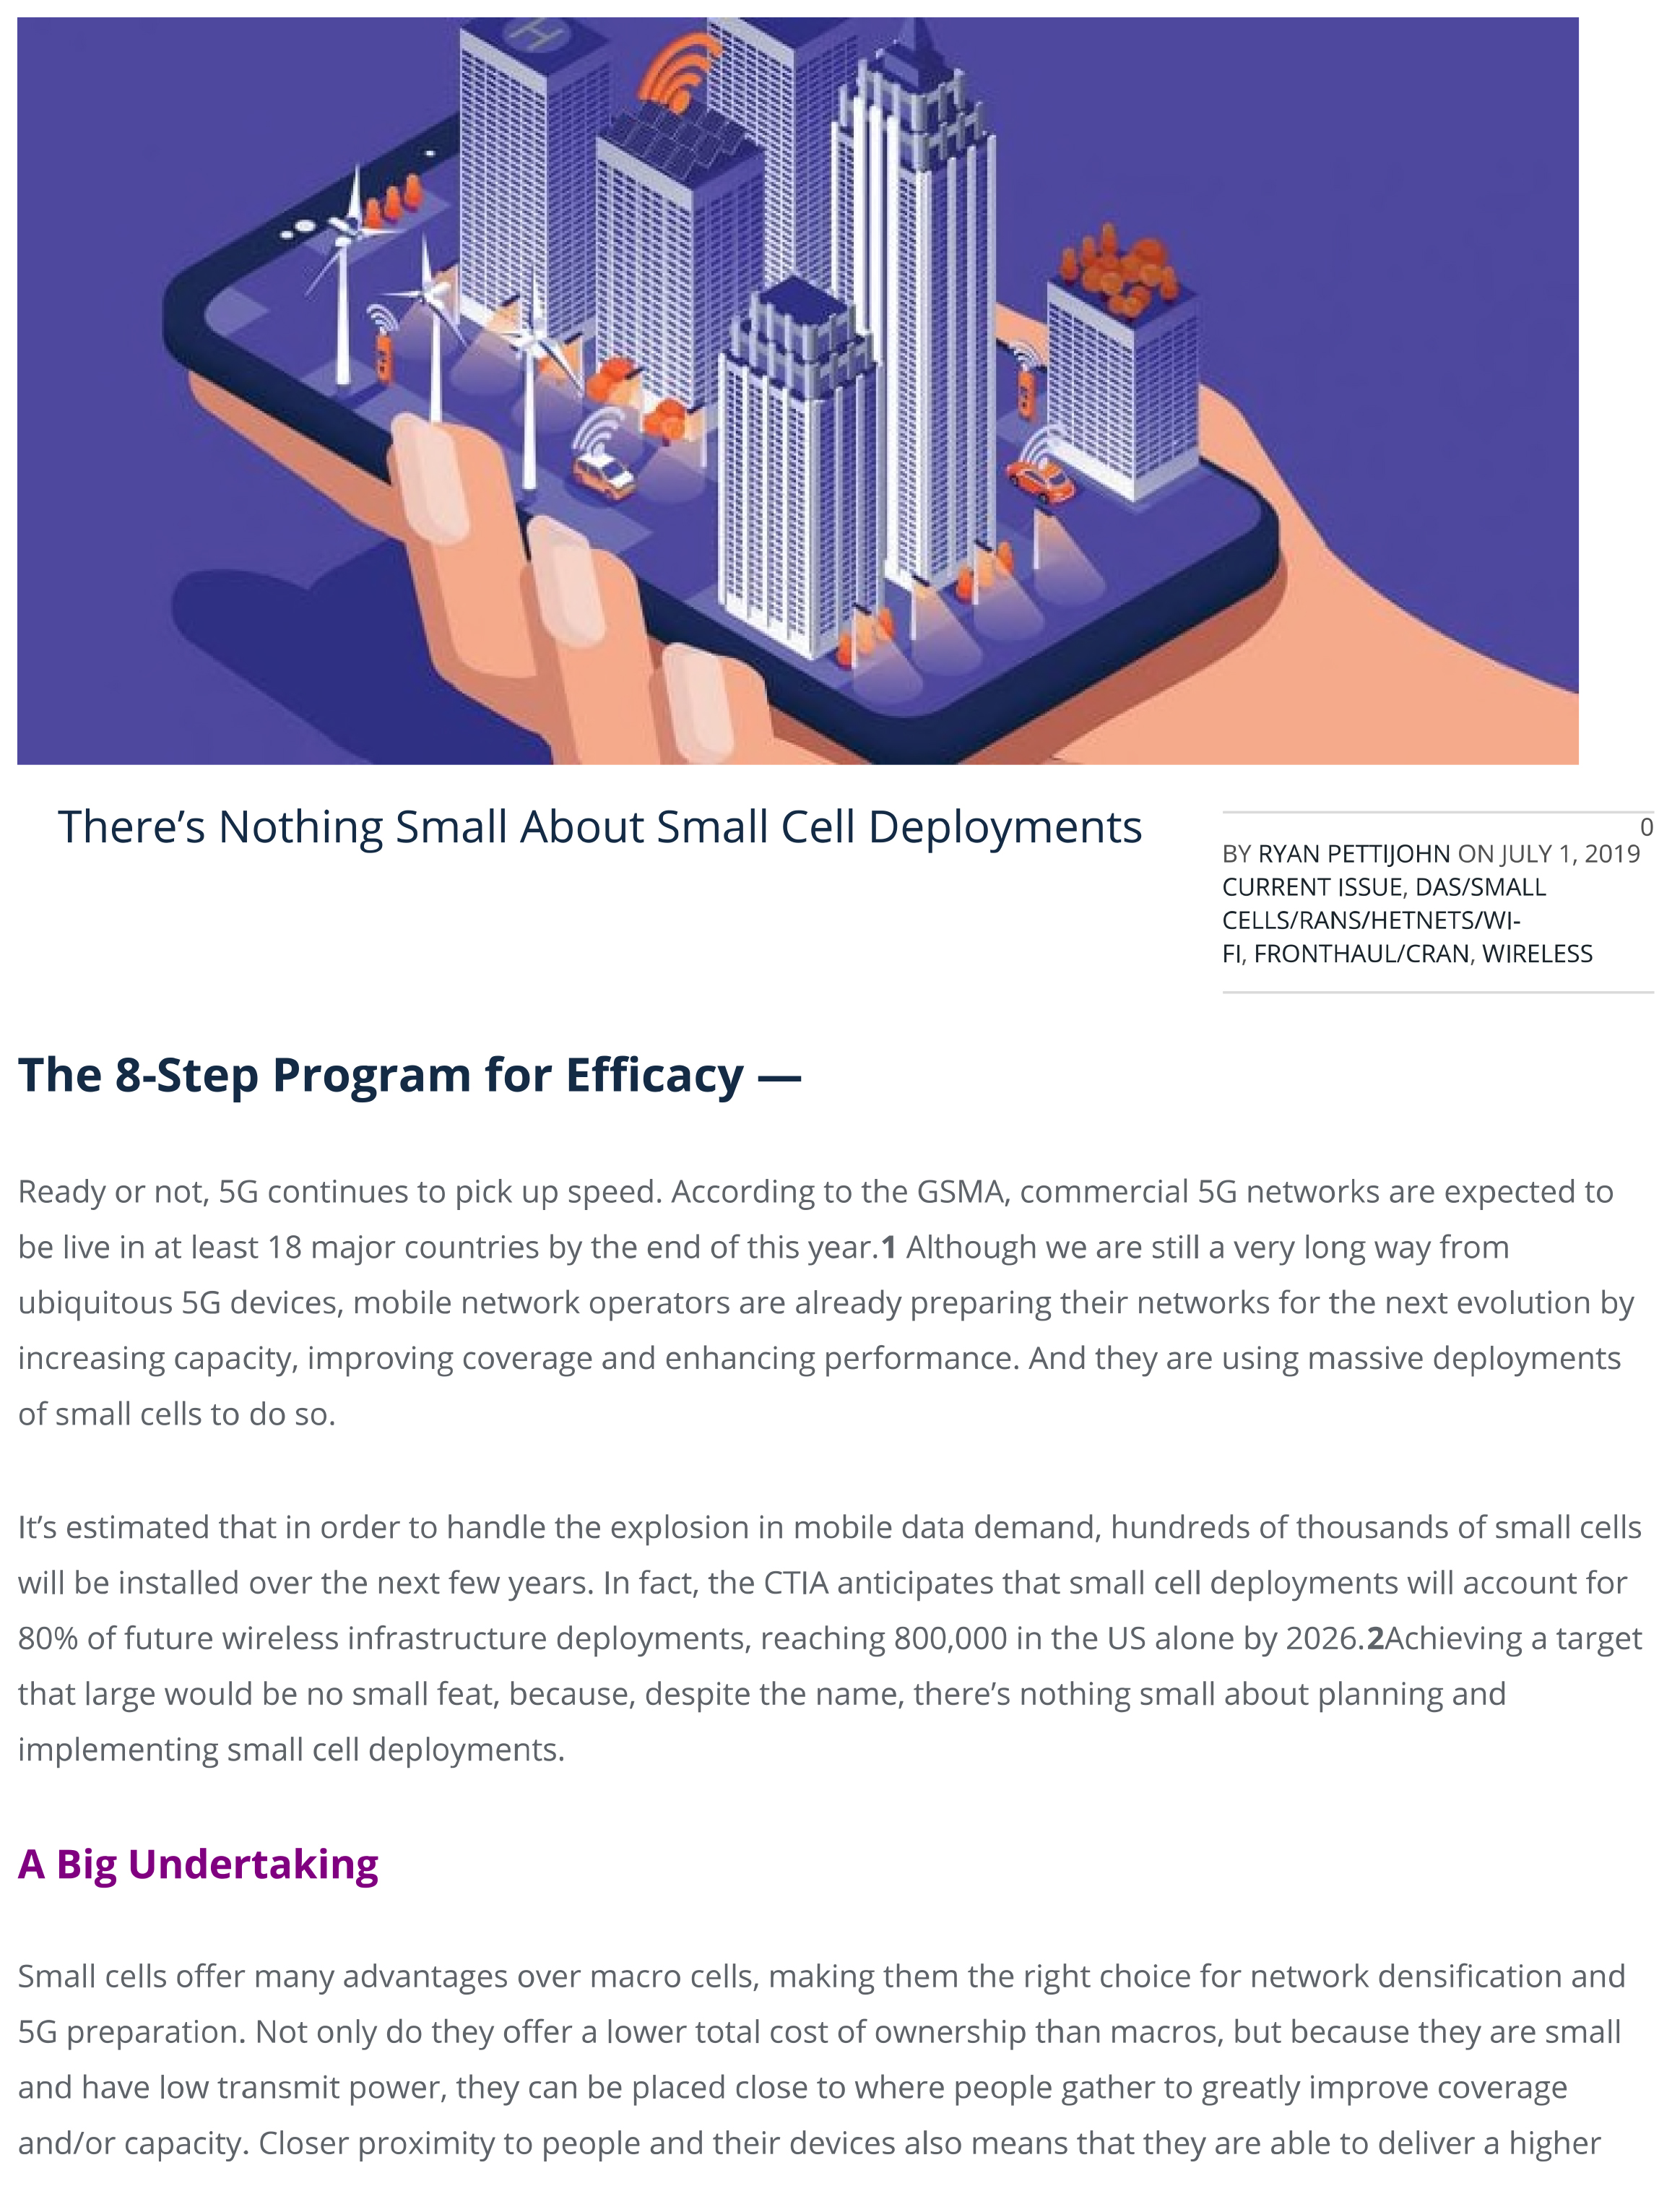 There’s Nothing Small About Small Cell Deployments | ISEMAG